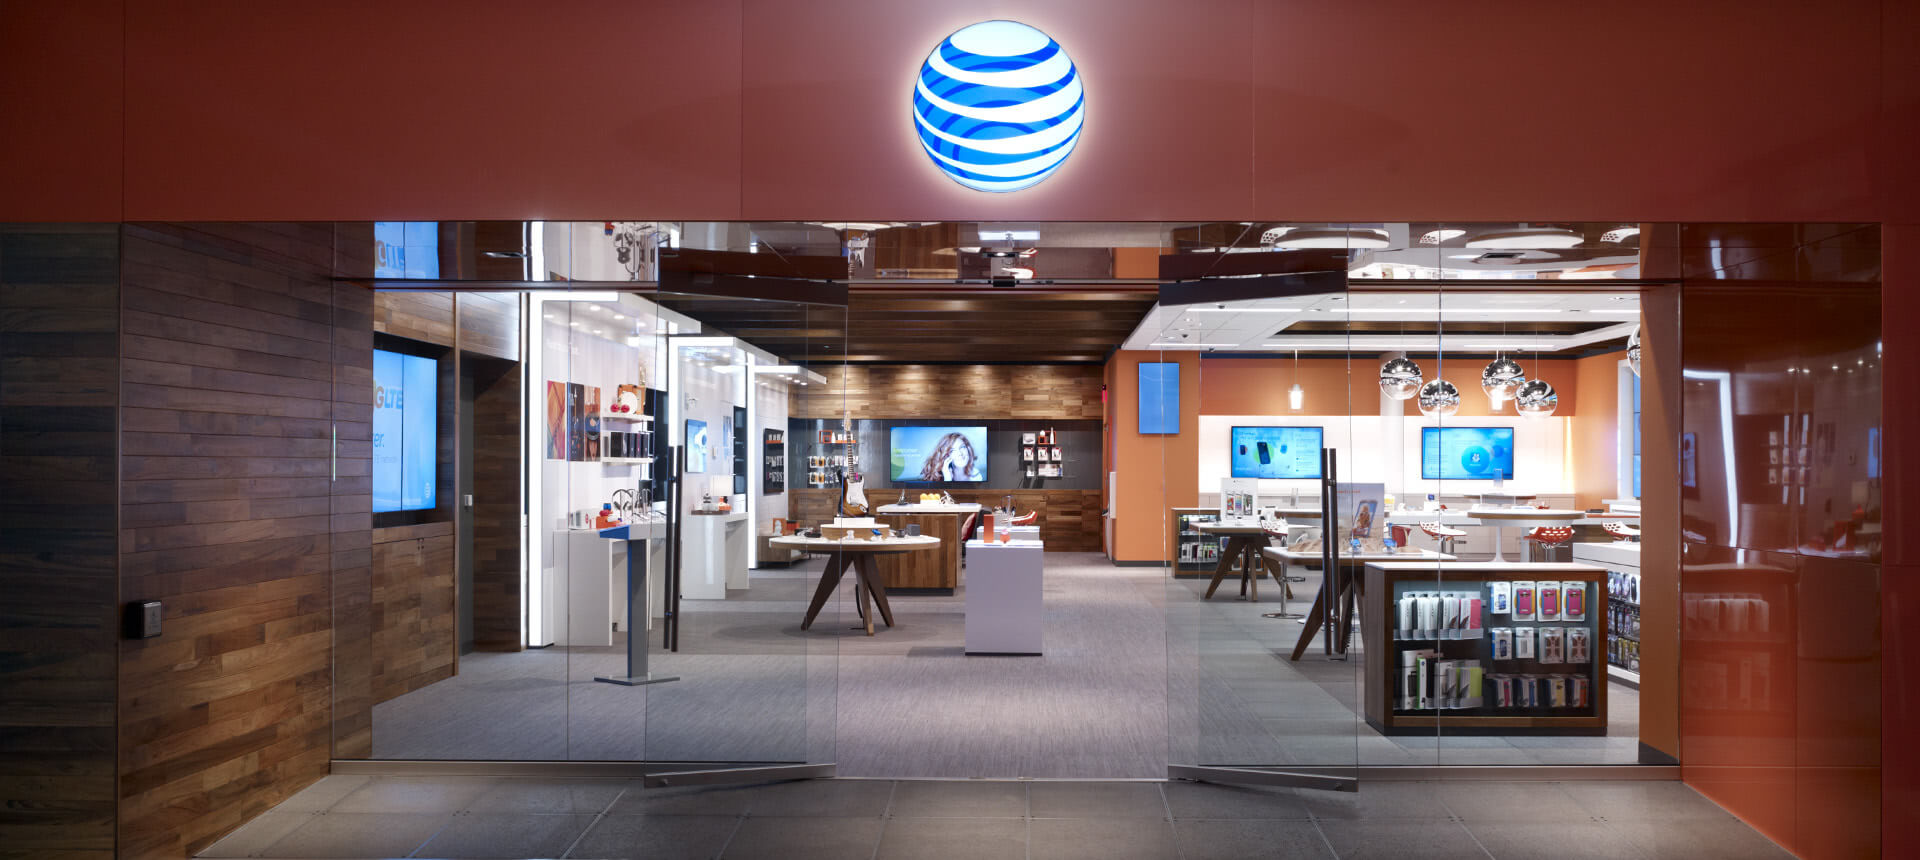 Online At&t Store Business